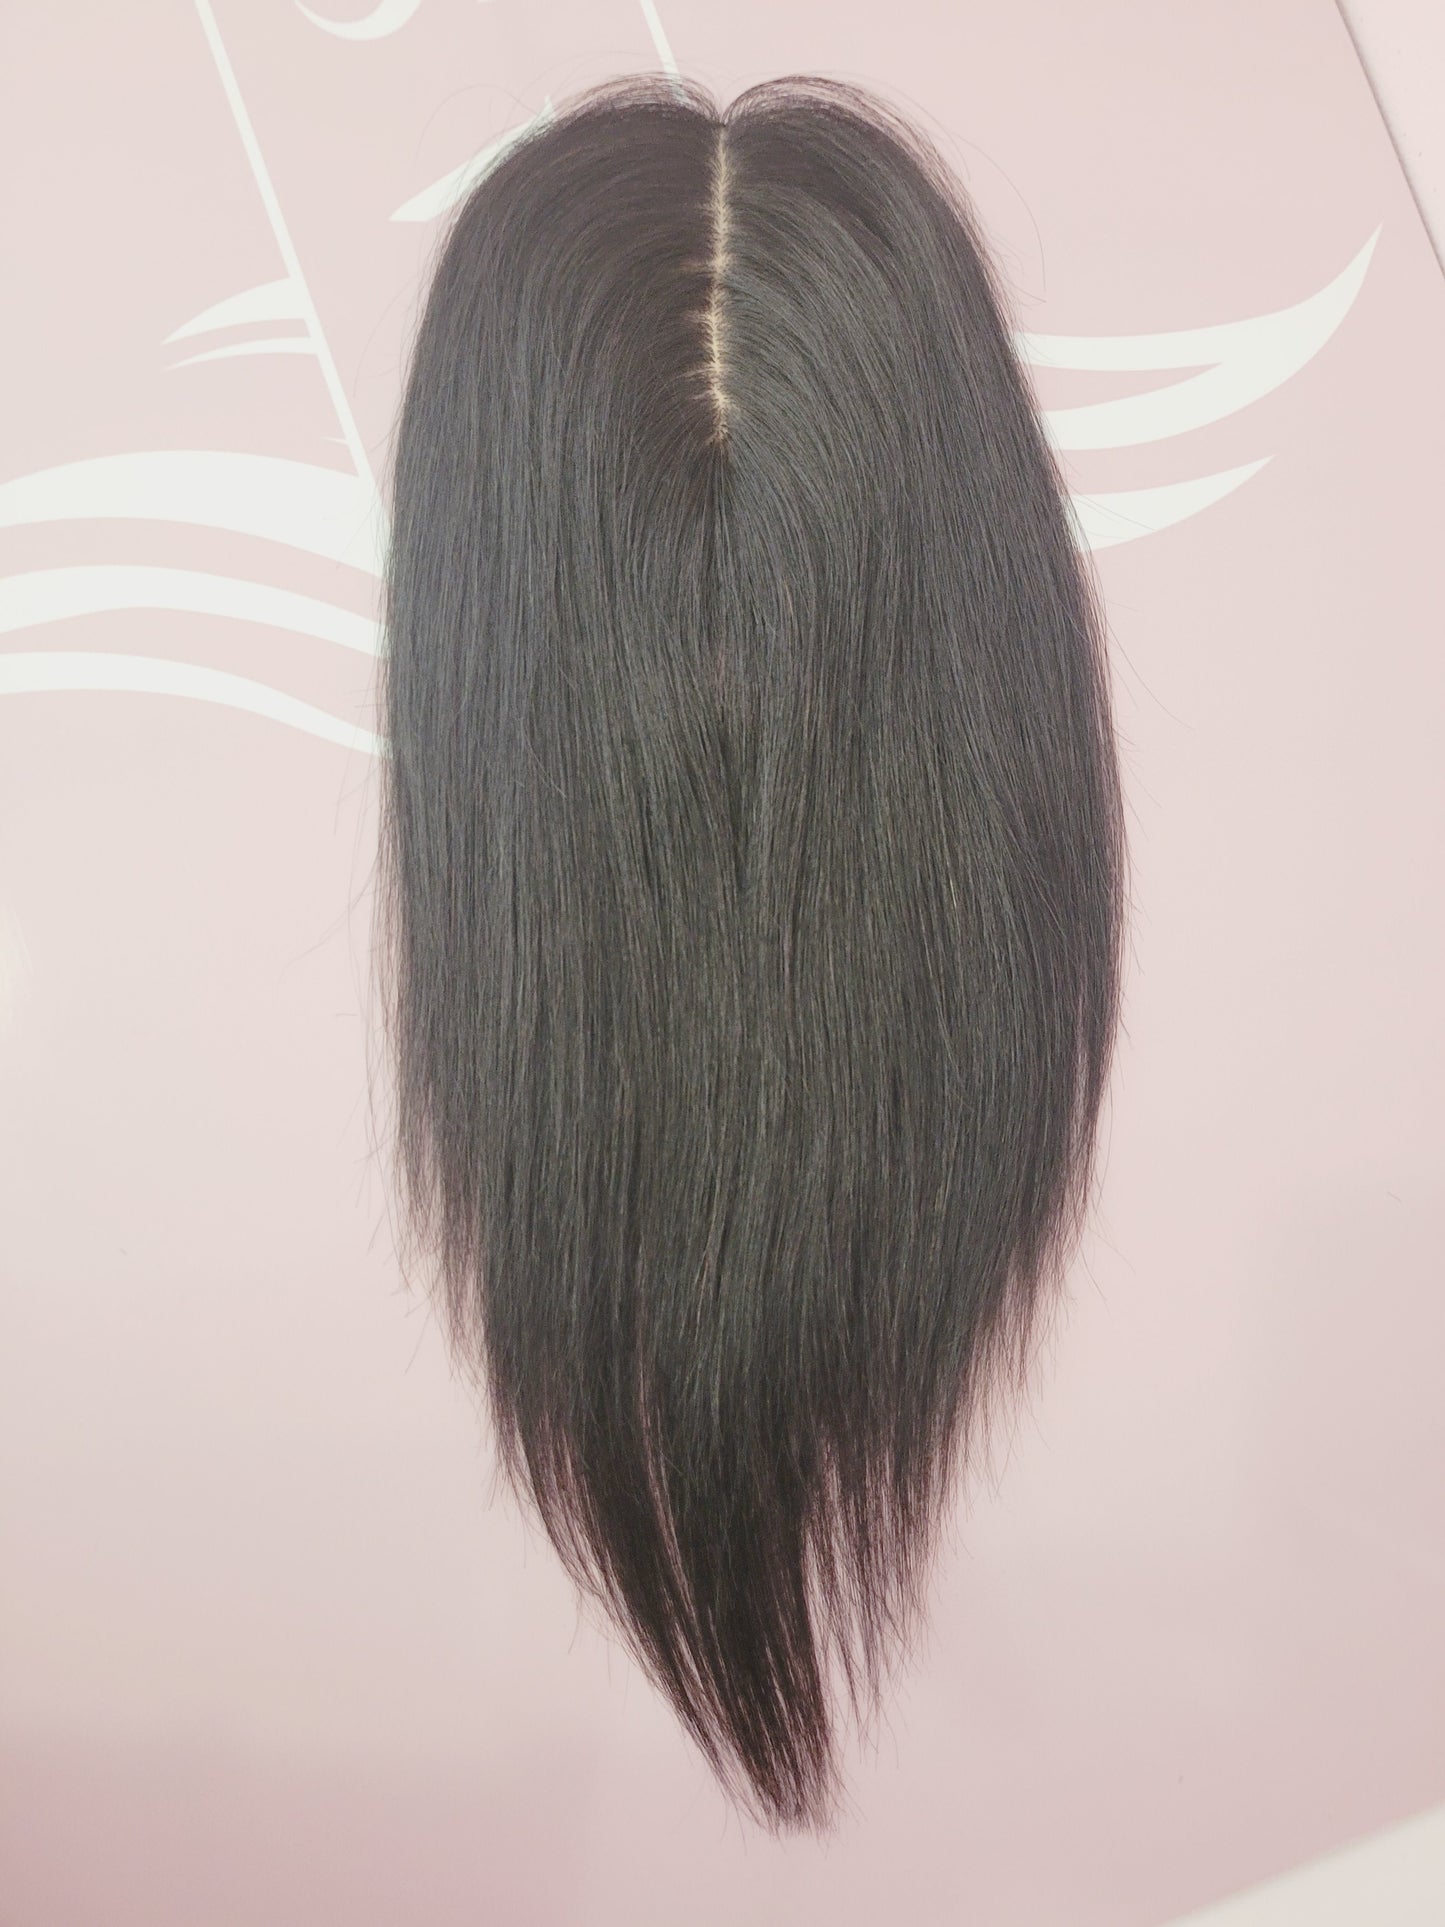 Crown Hair Toppers, Seamless Solutions for Hair Loss and Thinning Hair